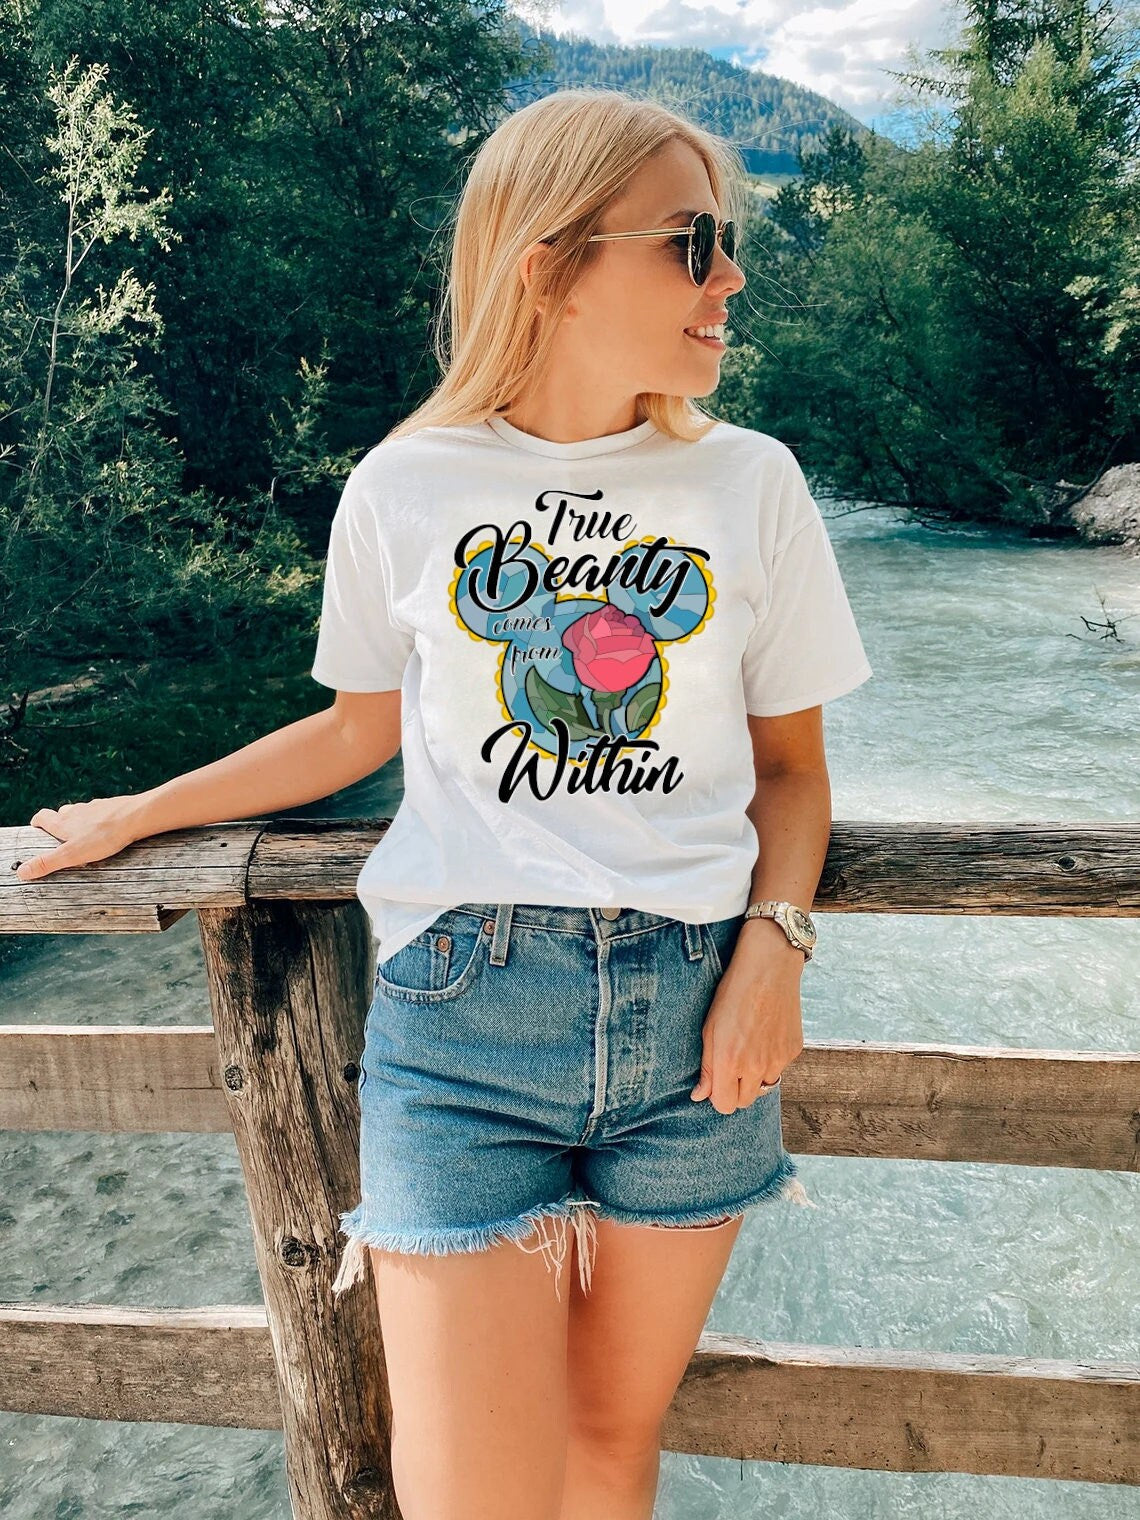 Beauty and the Beast Stained Glass, True Beauty Comes From Within, Princess Shirt, Disney Trip, Vacation Shirt